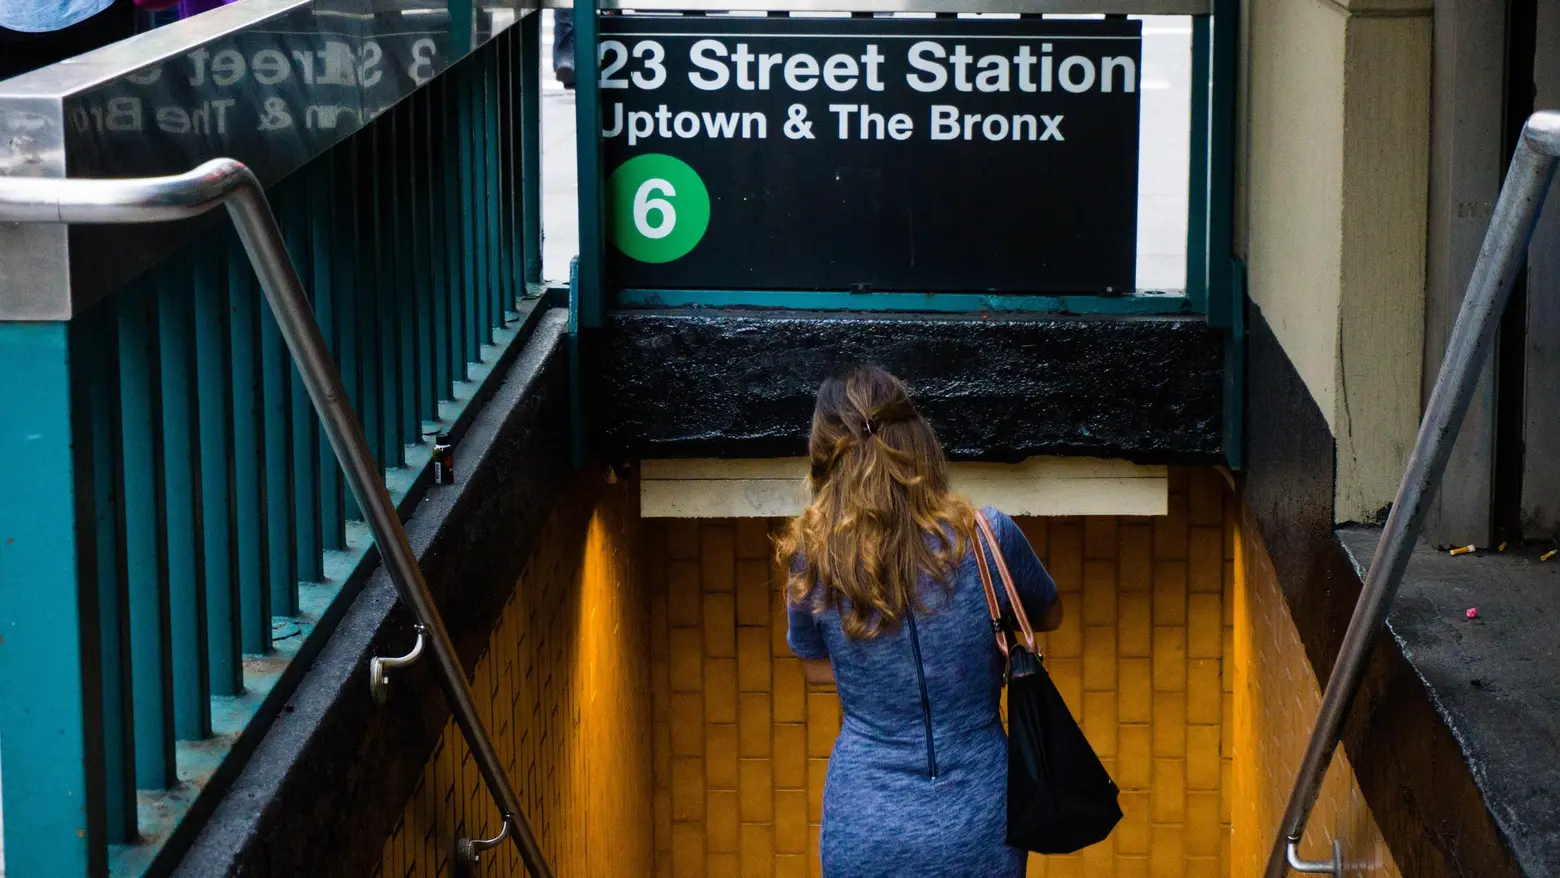 NYC has fewer accessible subway stations than MTA claims, report says